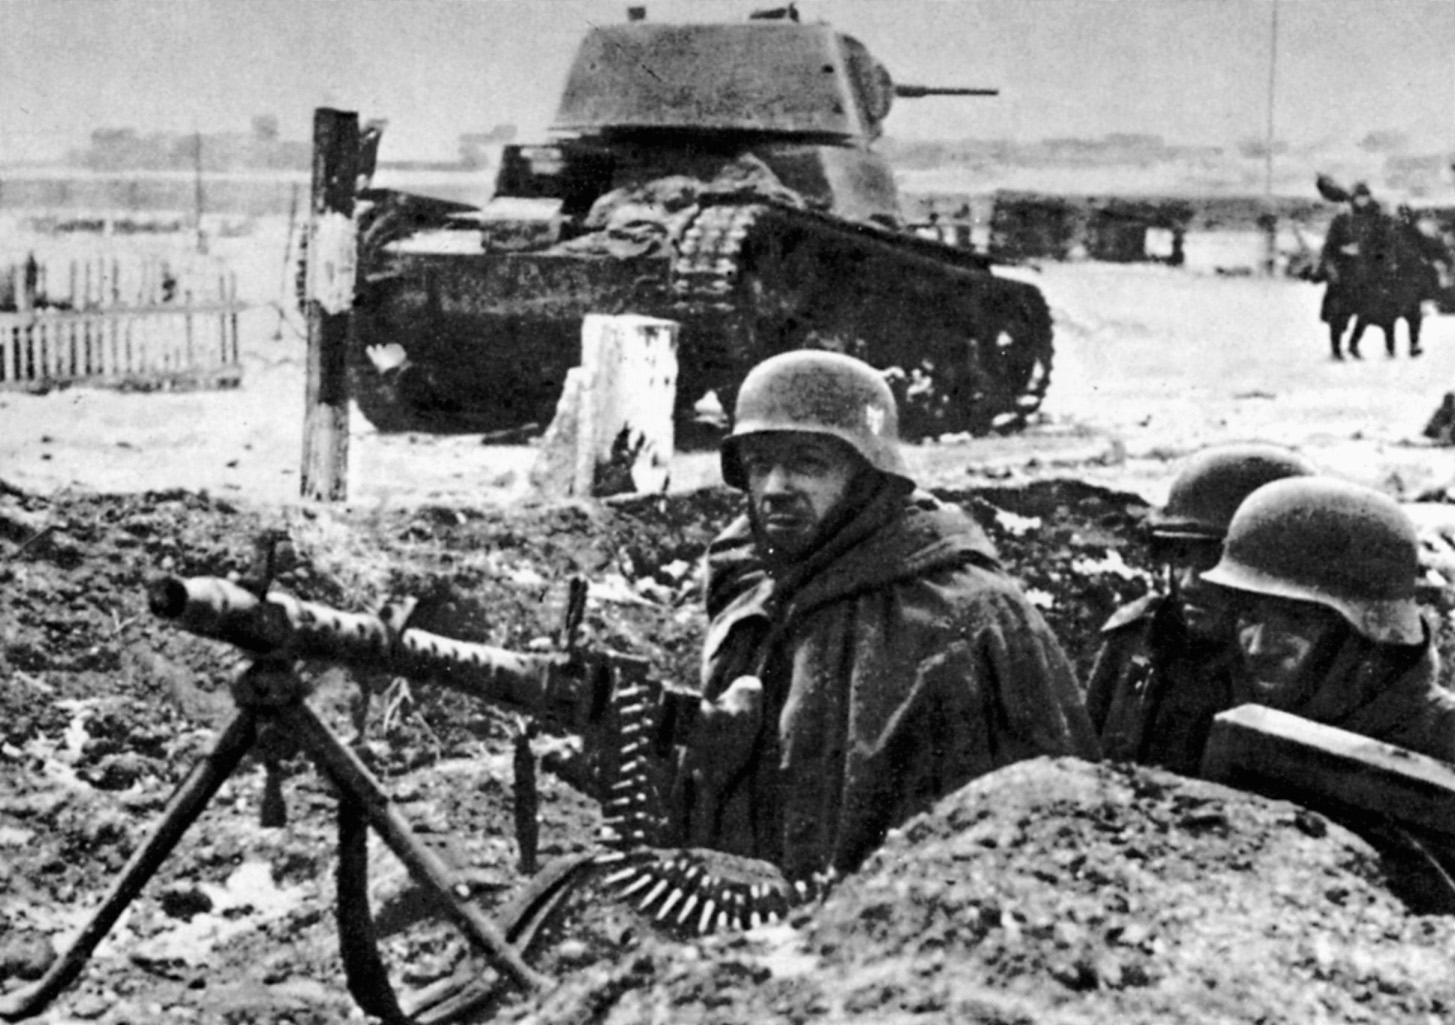 With the wreckage of a Soviet T-34 behind them, a German MG-34 machine gun crew scans the horizon for signs of a Red Army attack.